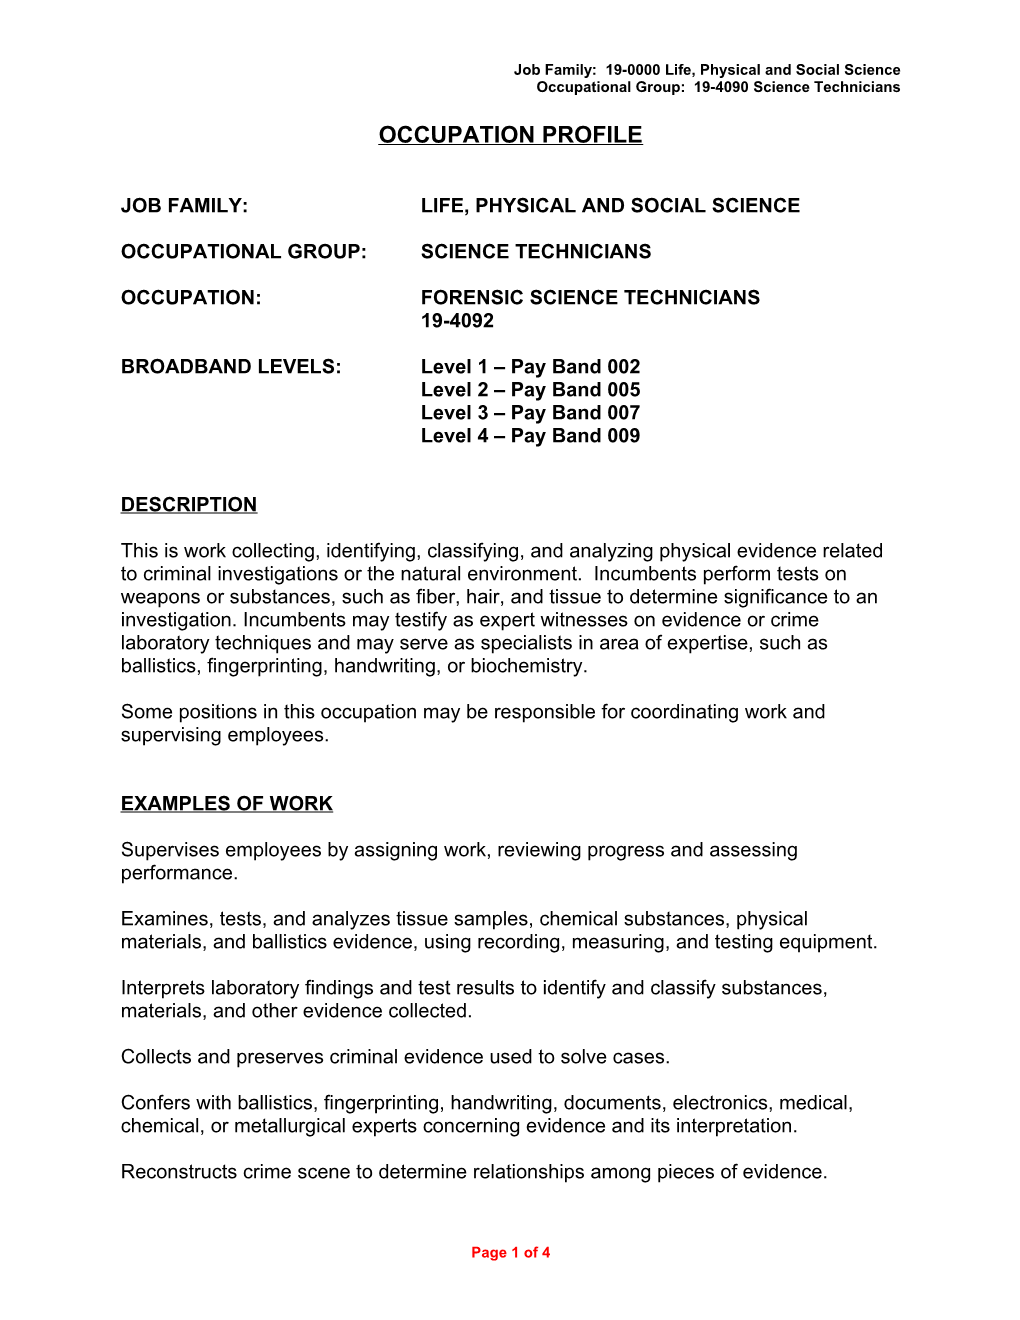 Job Family: 19-0000 Life, Physical and Social Science s3